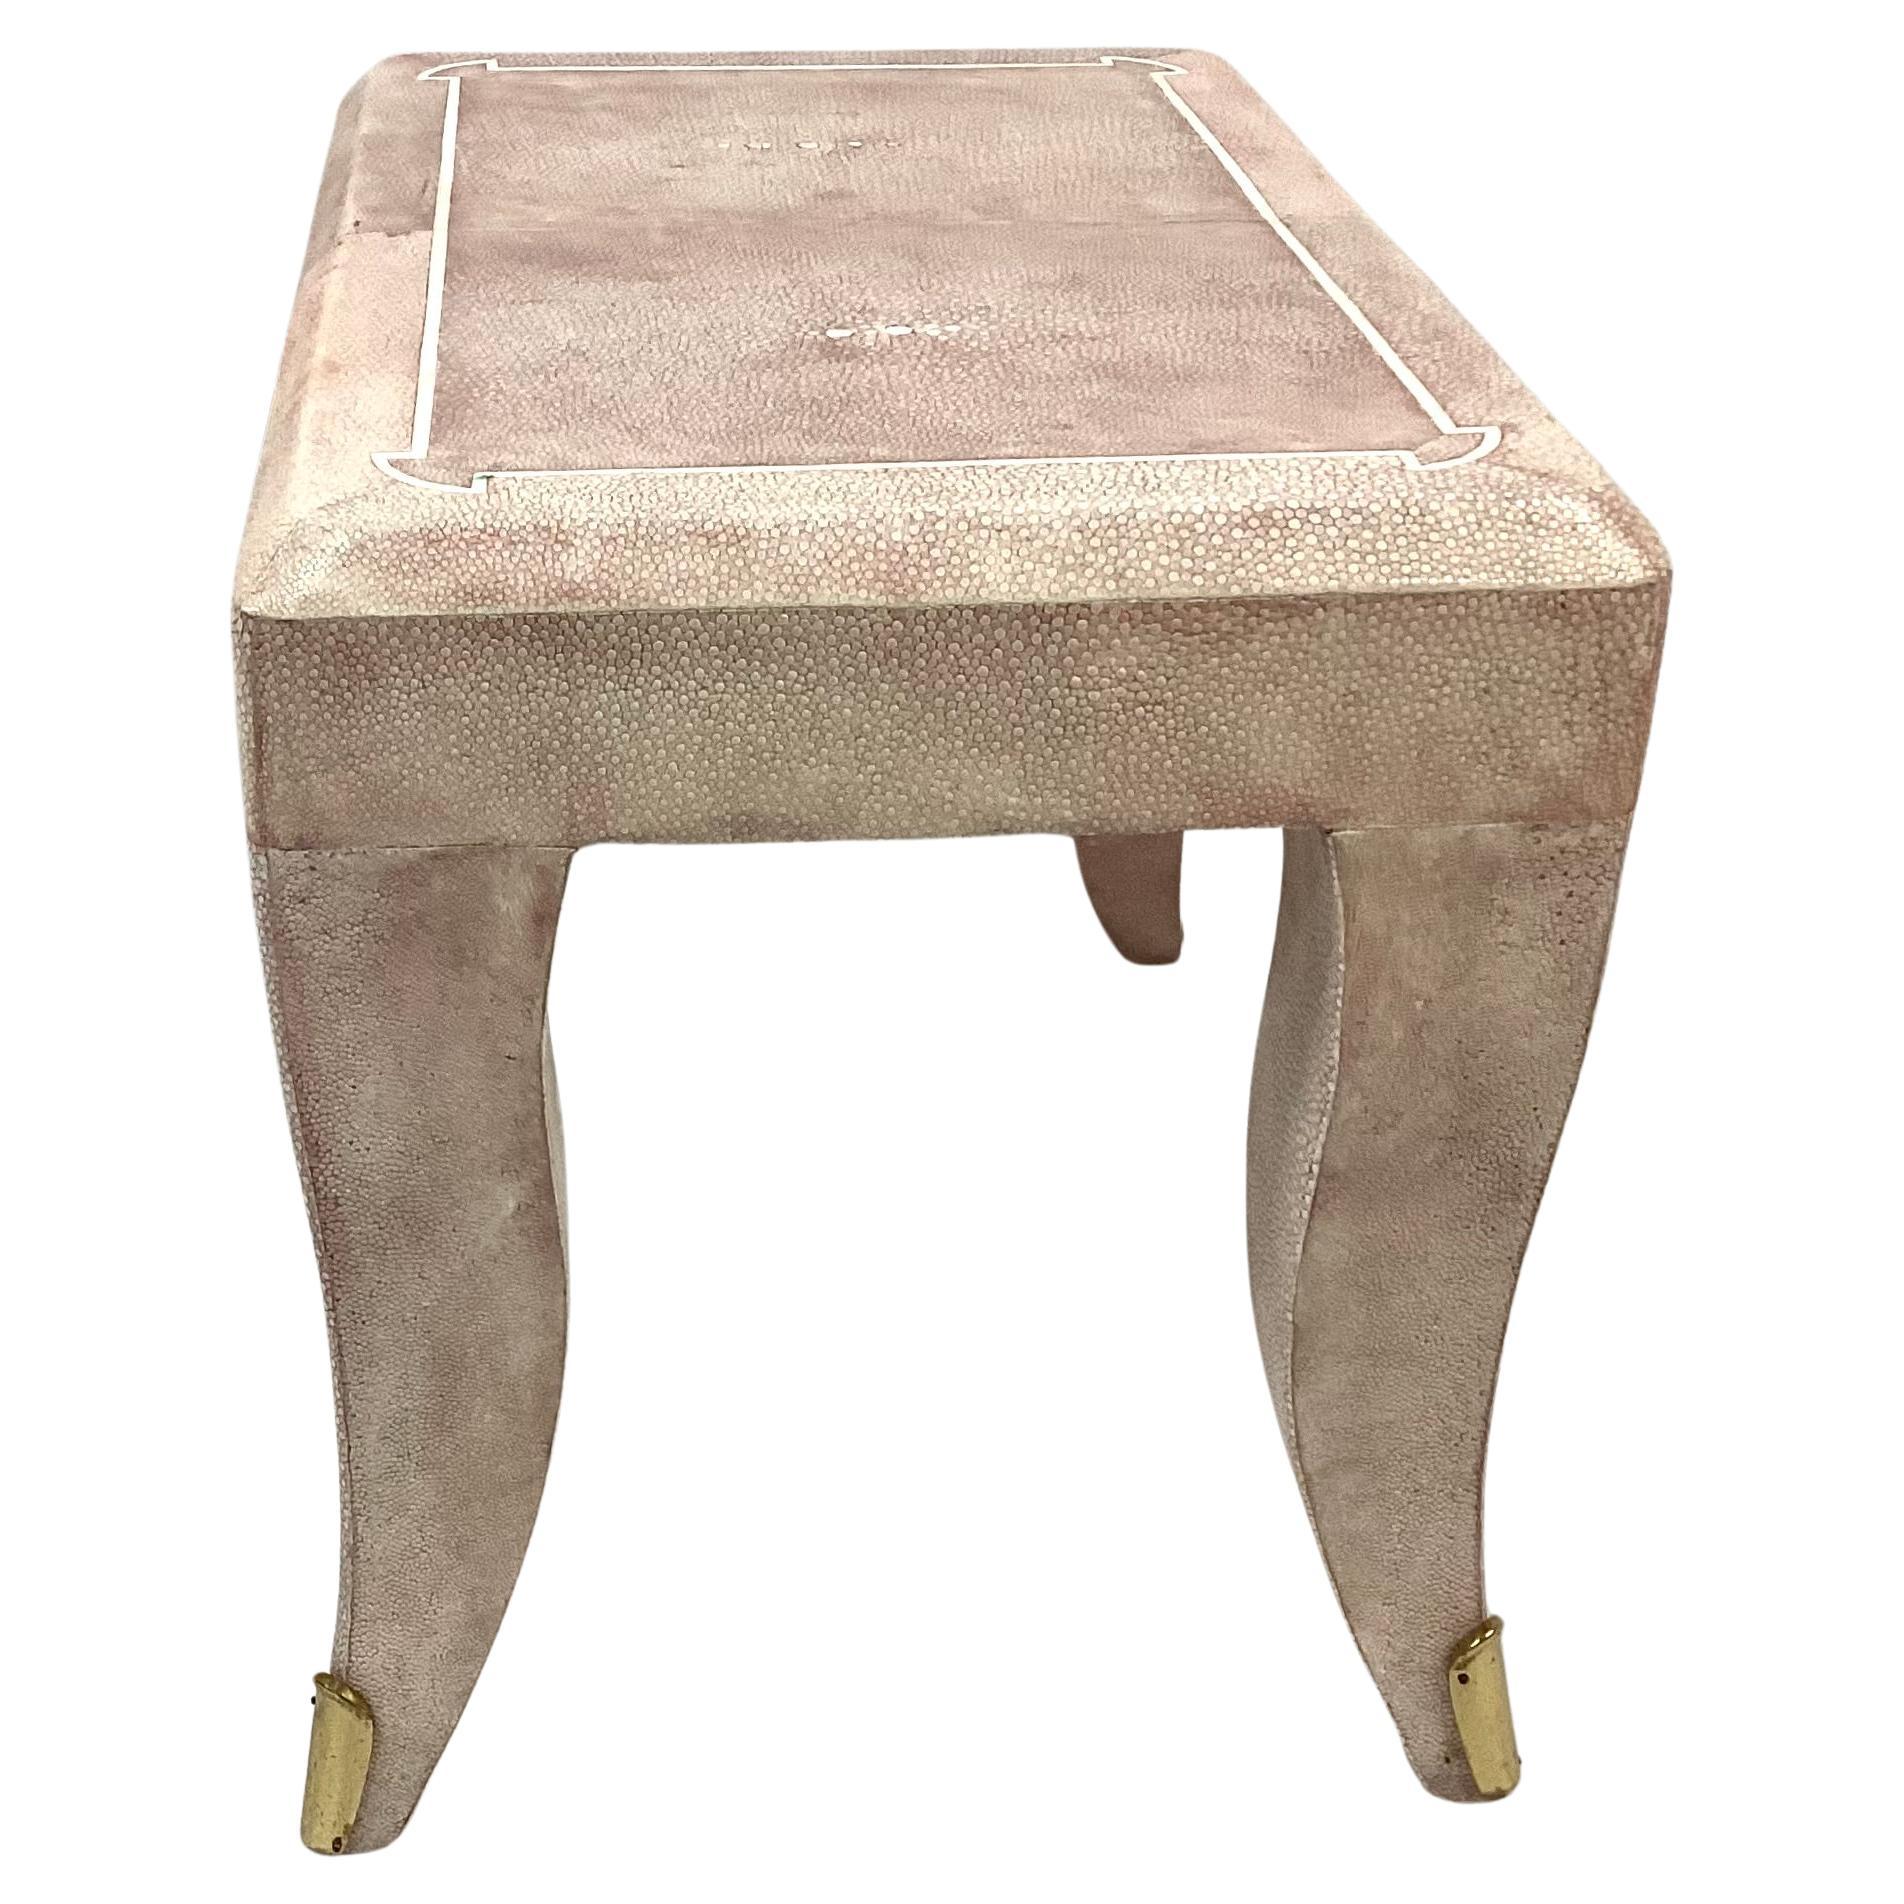 Art Deco Foot Stool in Faux Pink Shagreen With Brass Leg Adornments